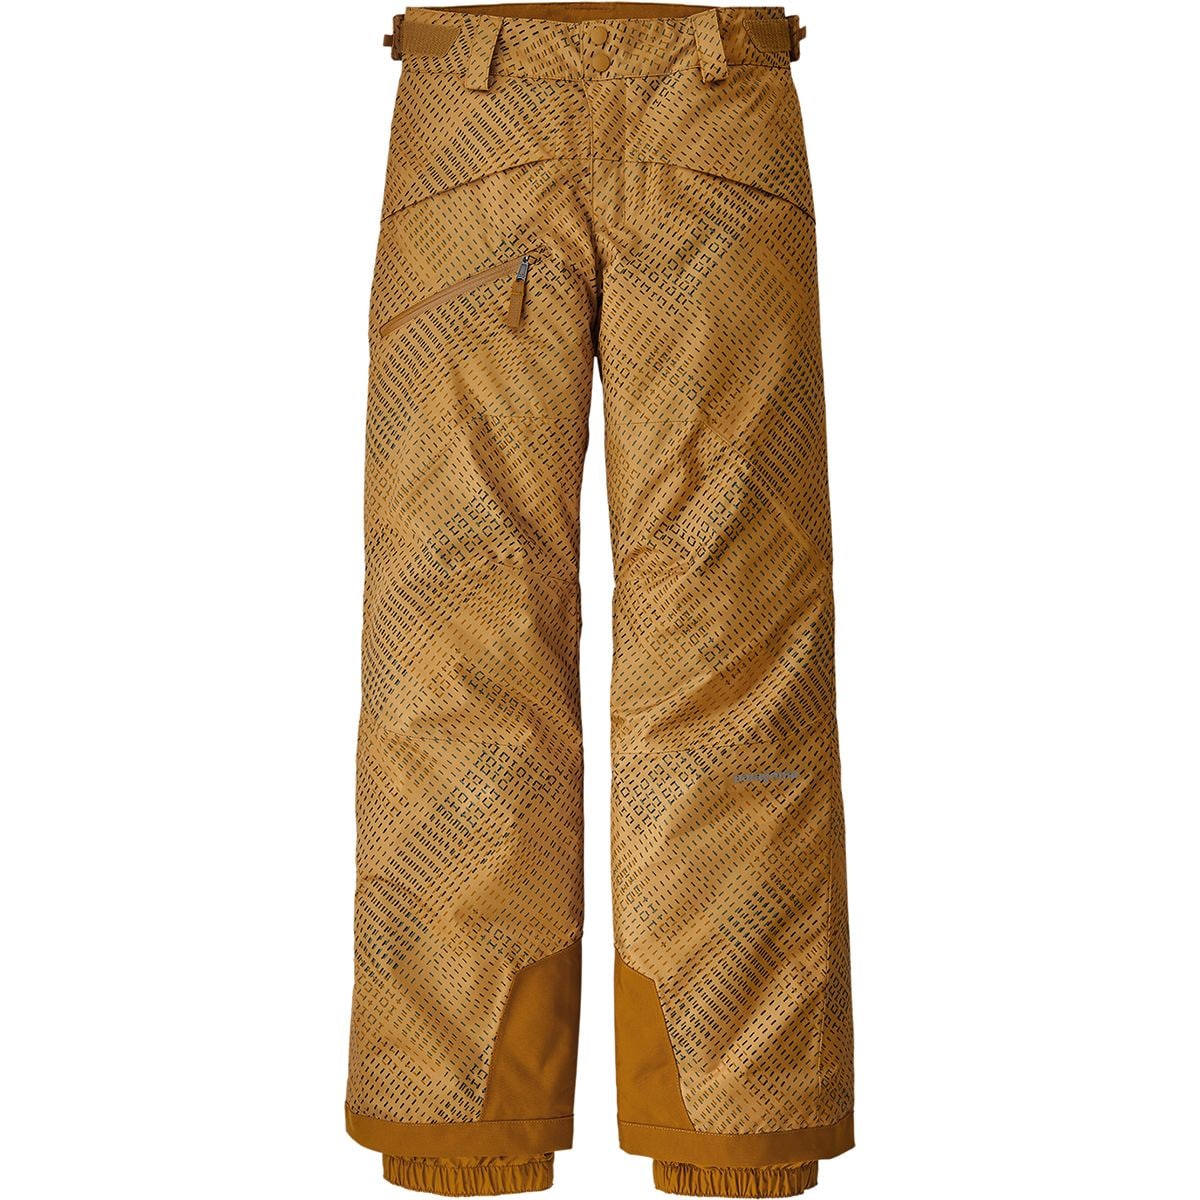 Patagonia Snowshot Insulated Pant - Boys' Stitch Grid/Glyph Gold